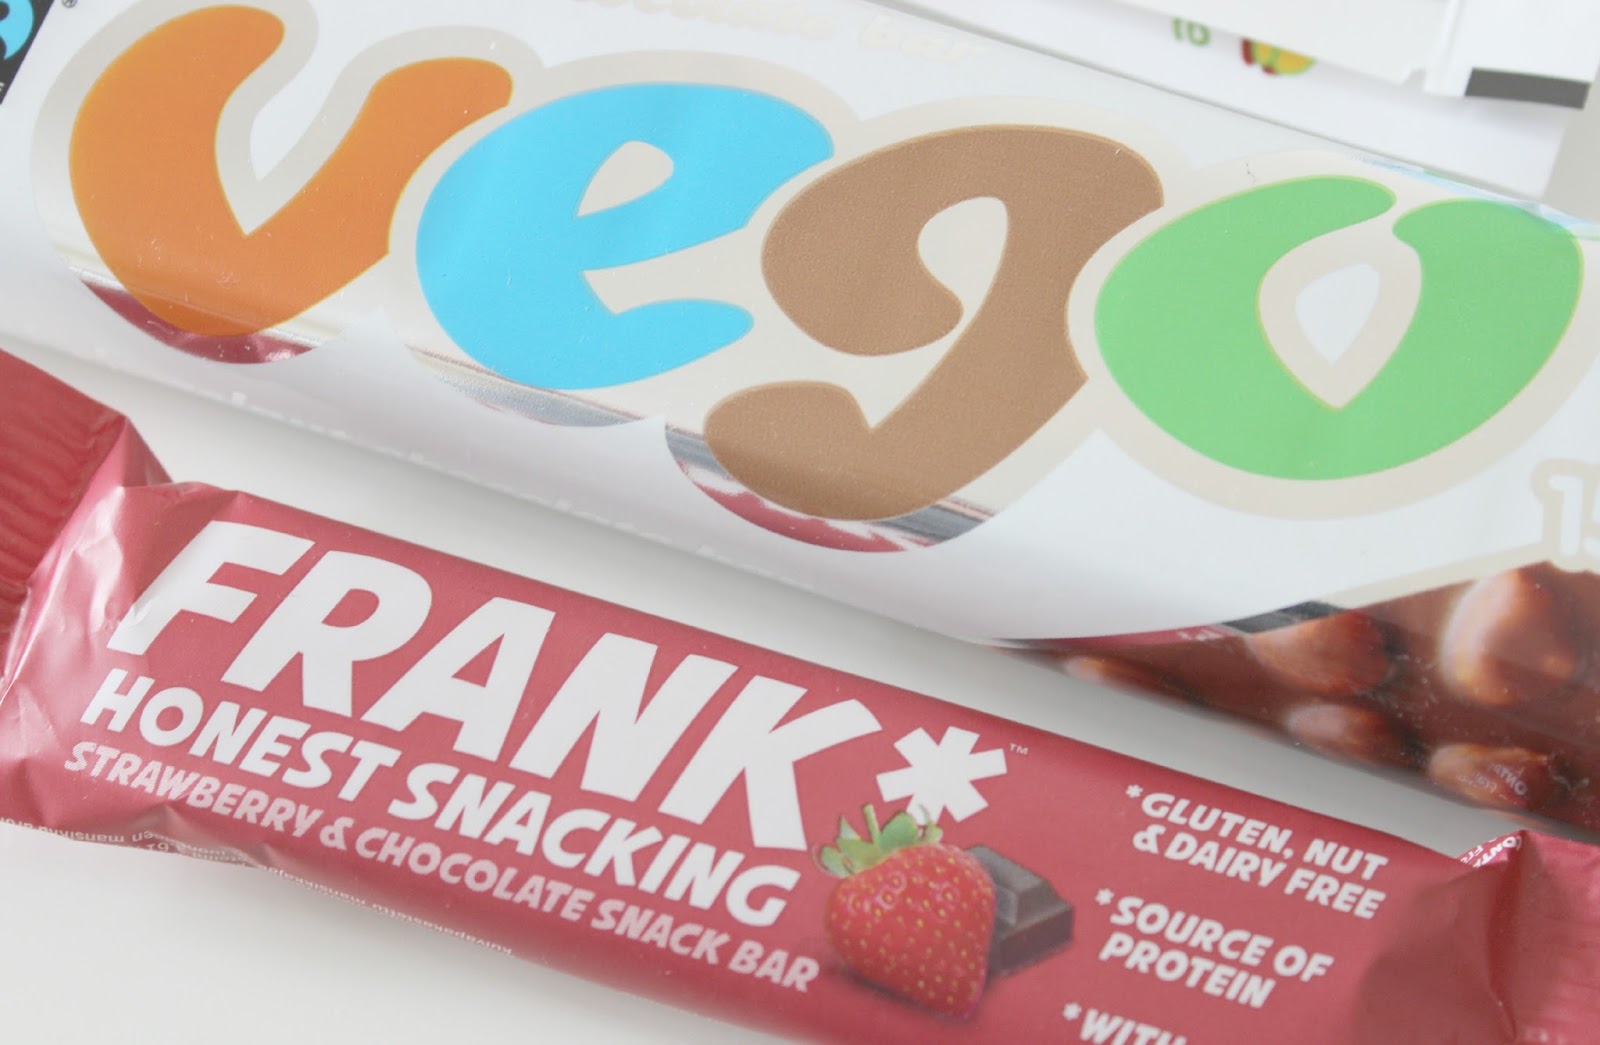 A picture of FRANK Honest Snacking Strawberry & Chocolate Snack Bar and Vego Whole Hazelnut Chocolate Bar